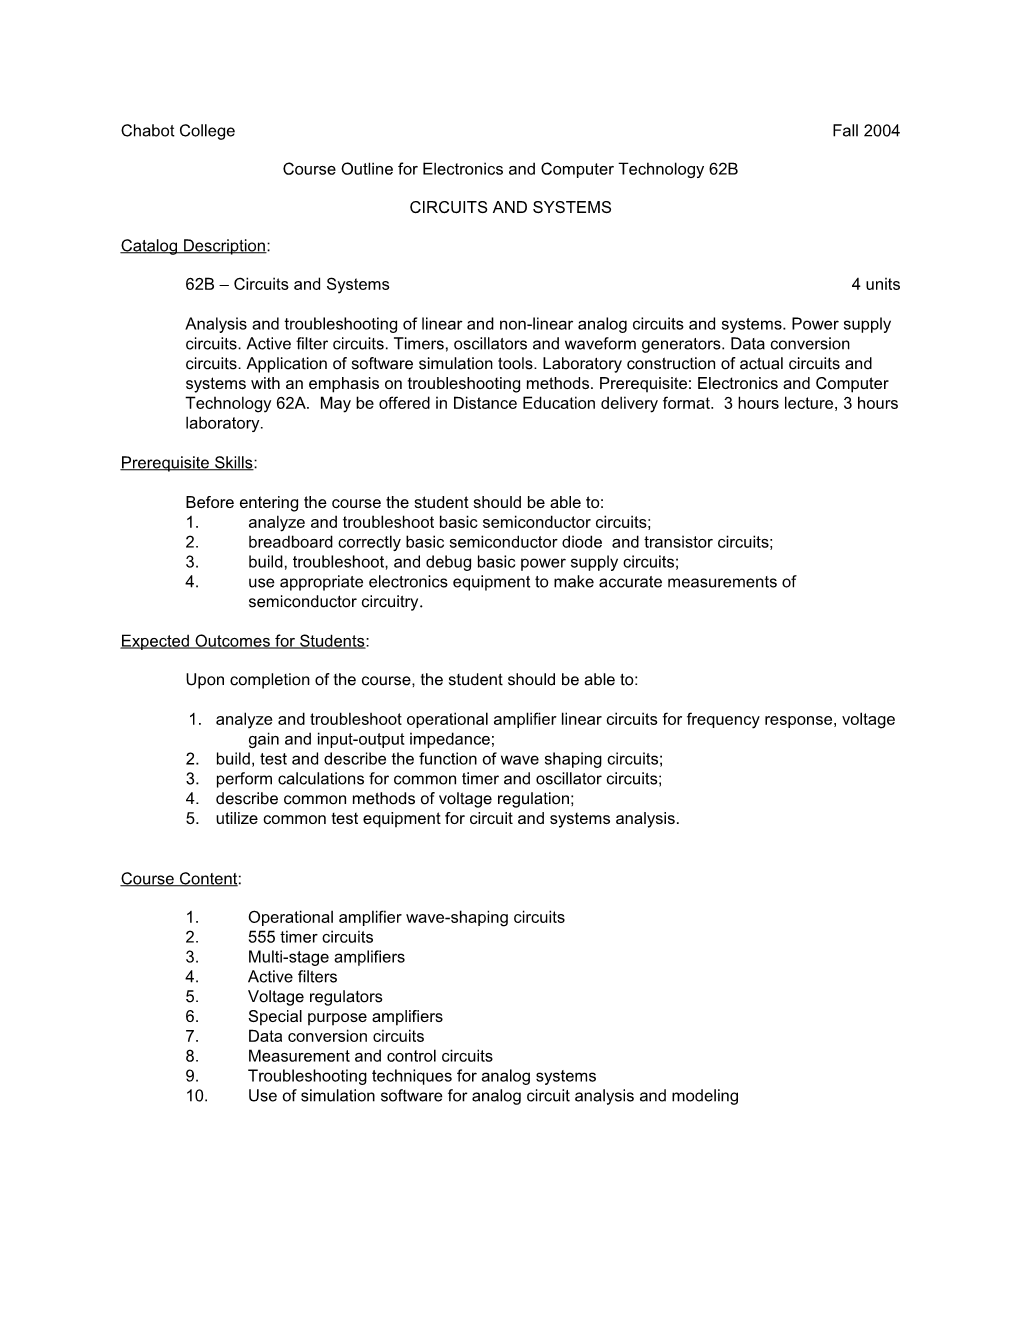 Course Outline for Electronics and Computer Technology 62B